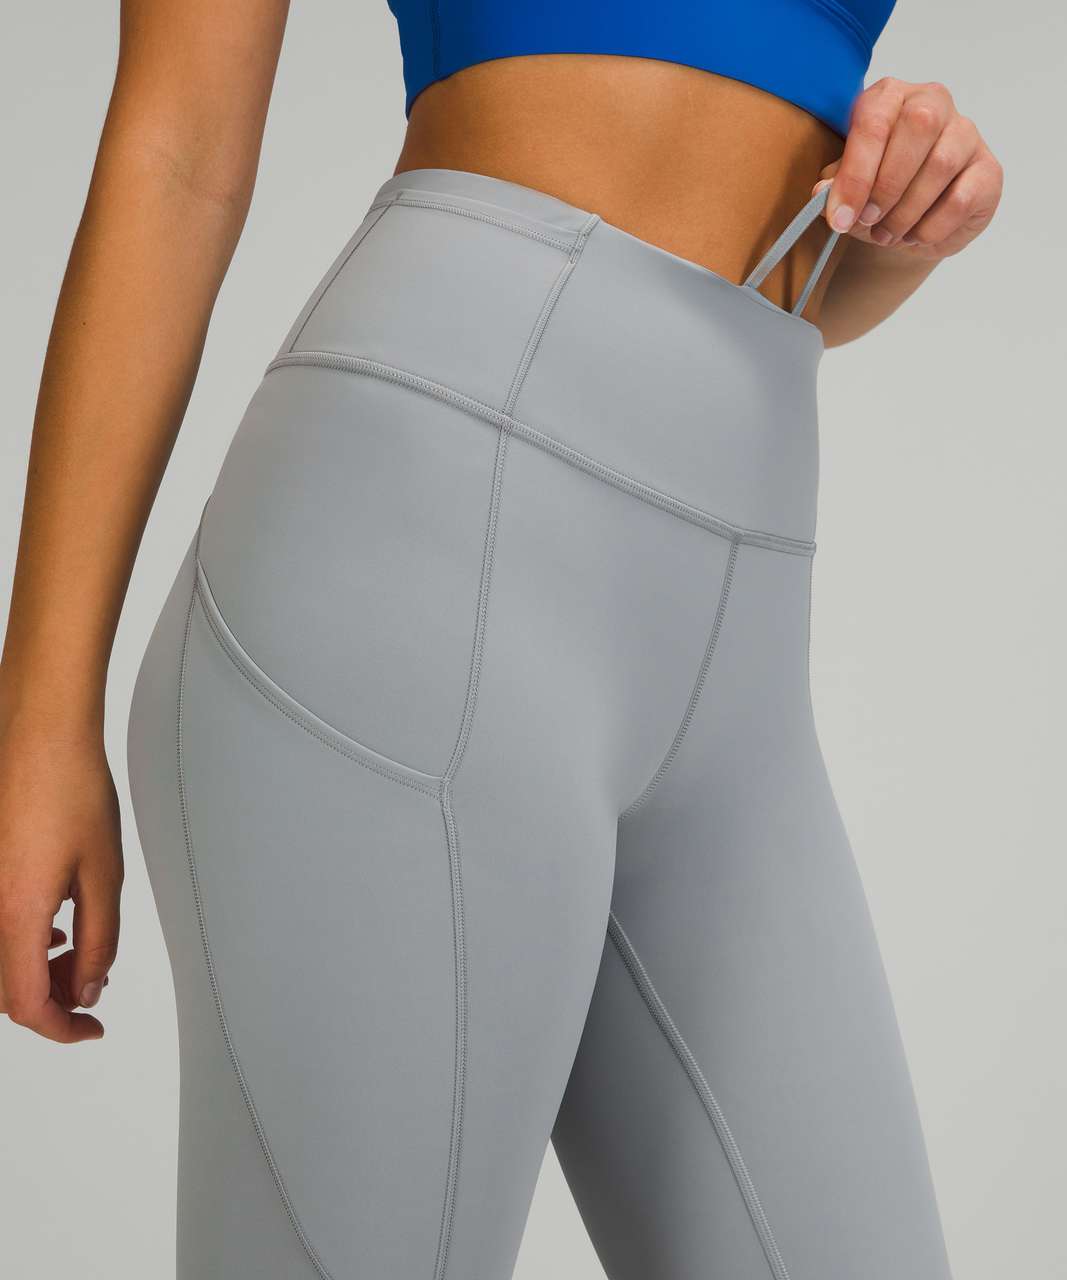 Lululemon Fast and Free High-Rise Tight 25" *Nulux - Rhino Grey